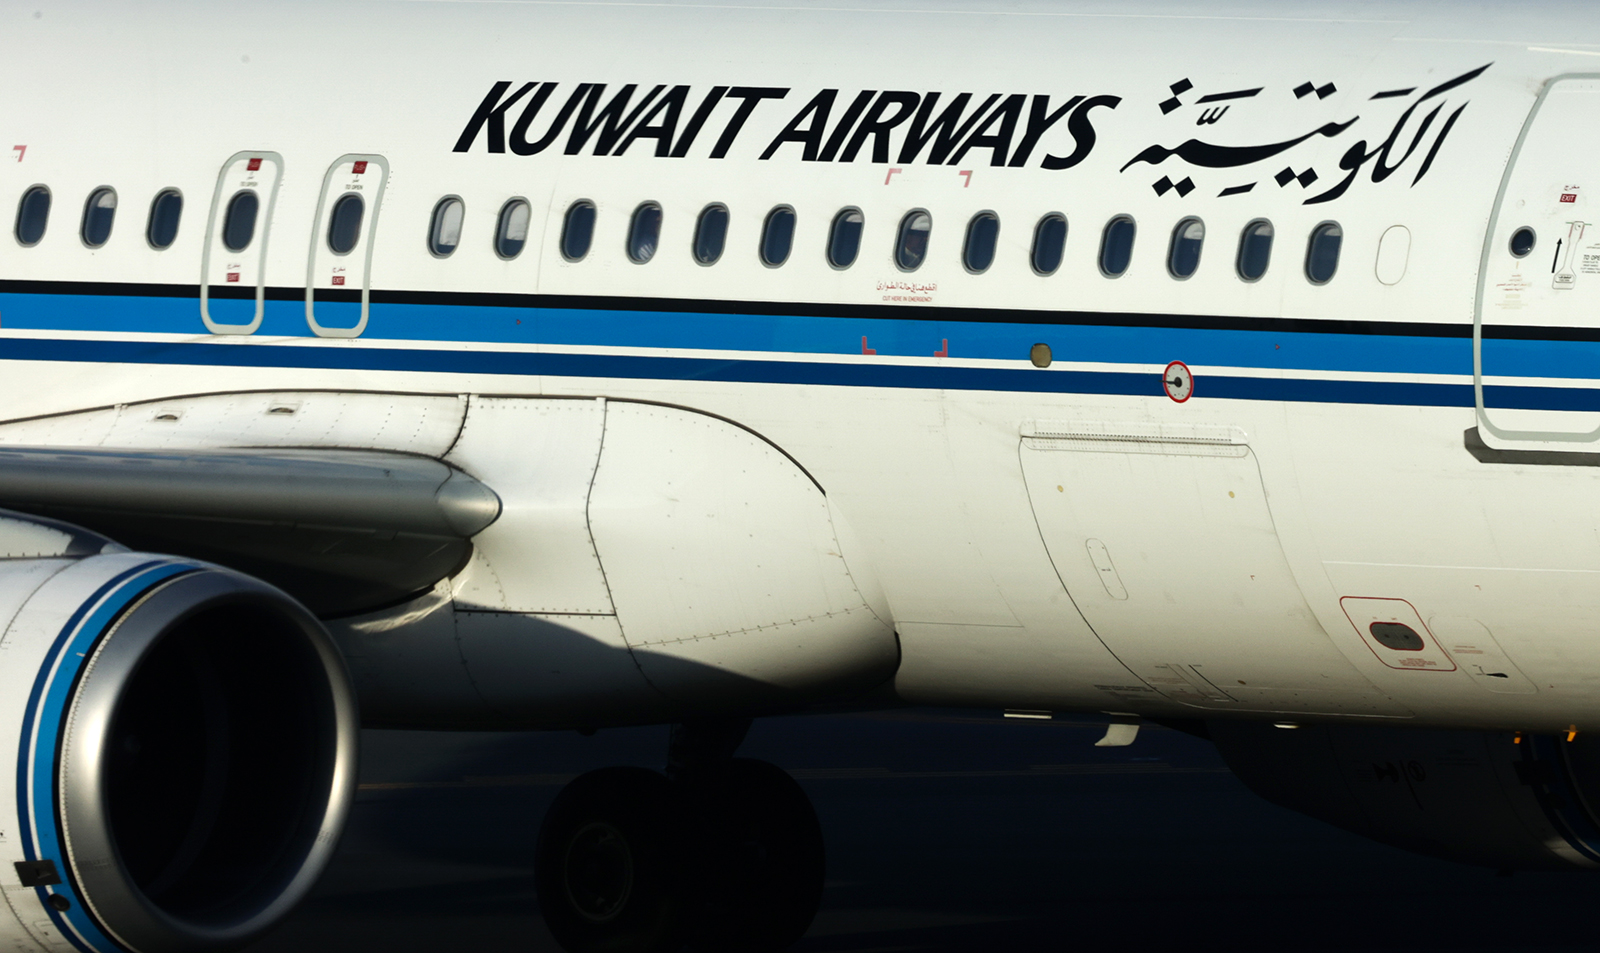 A Kuwait Airways plane is seen on the runway last month at an airport in Bahrain.